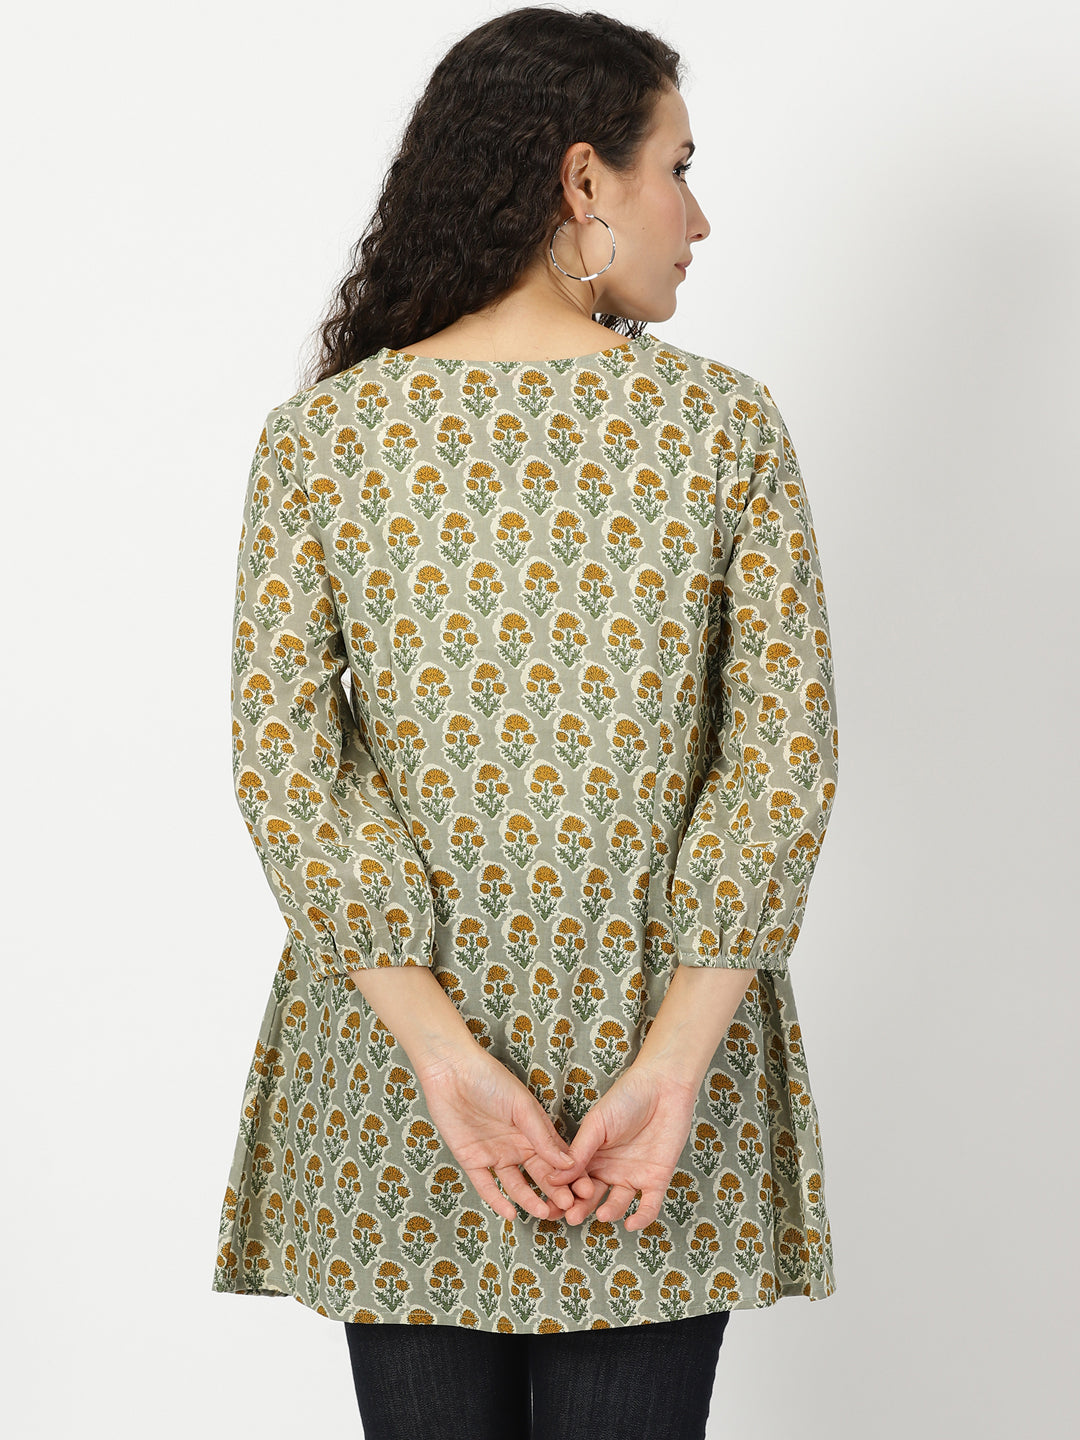 Green Floral Print A-line Tunic with Embroidered Yoke